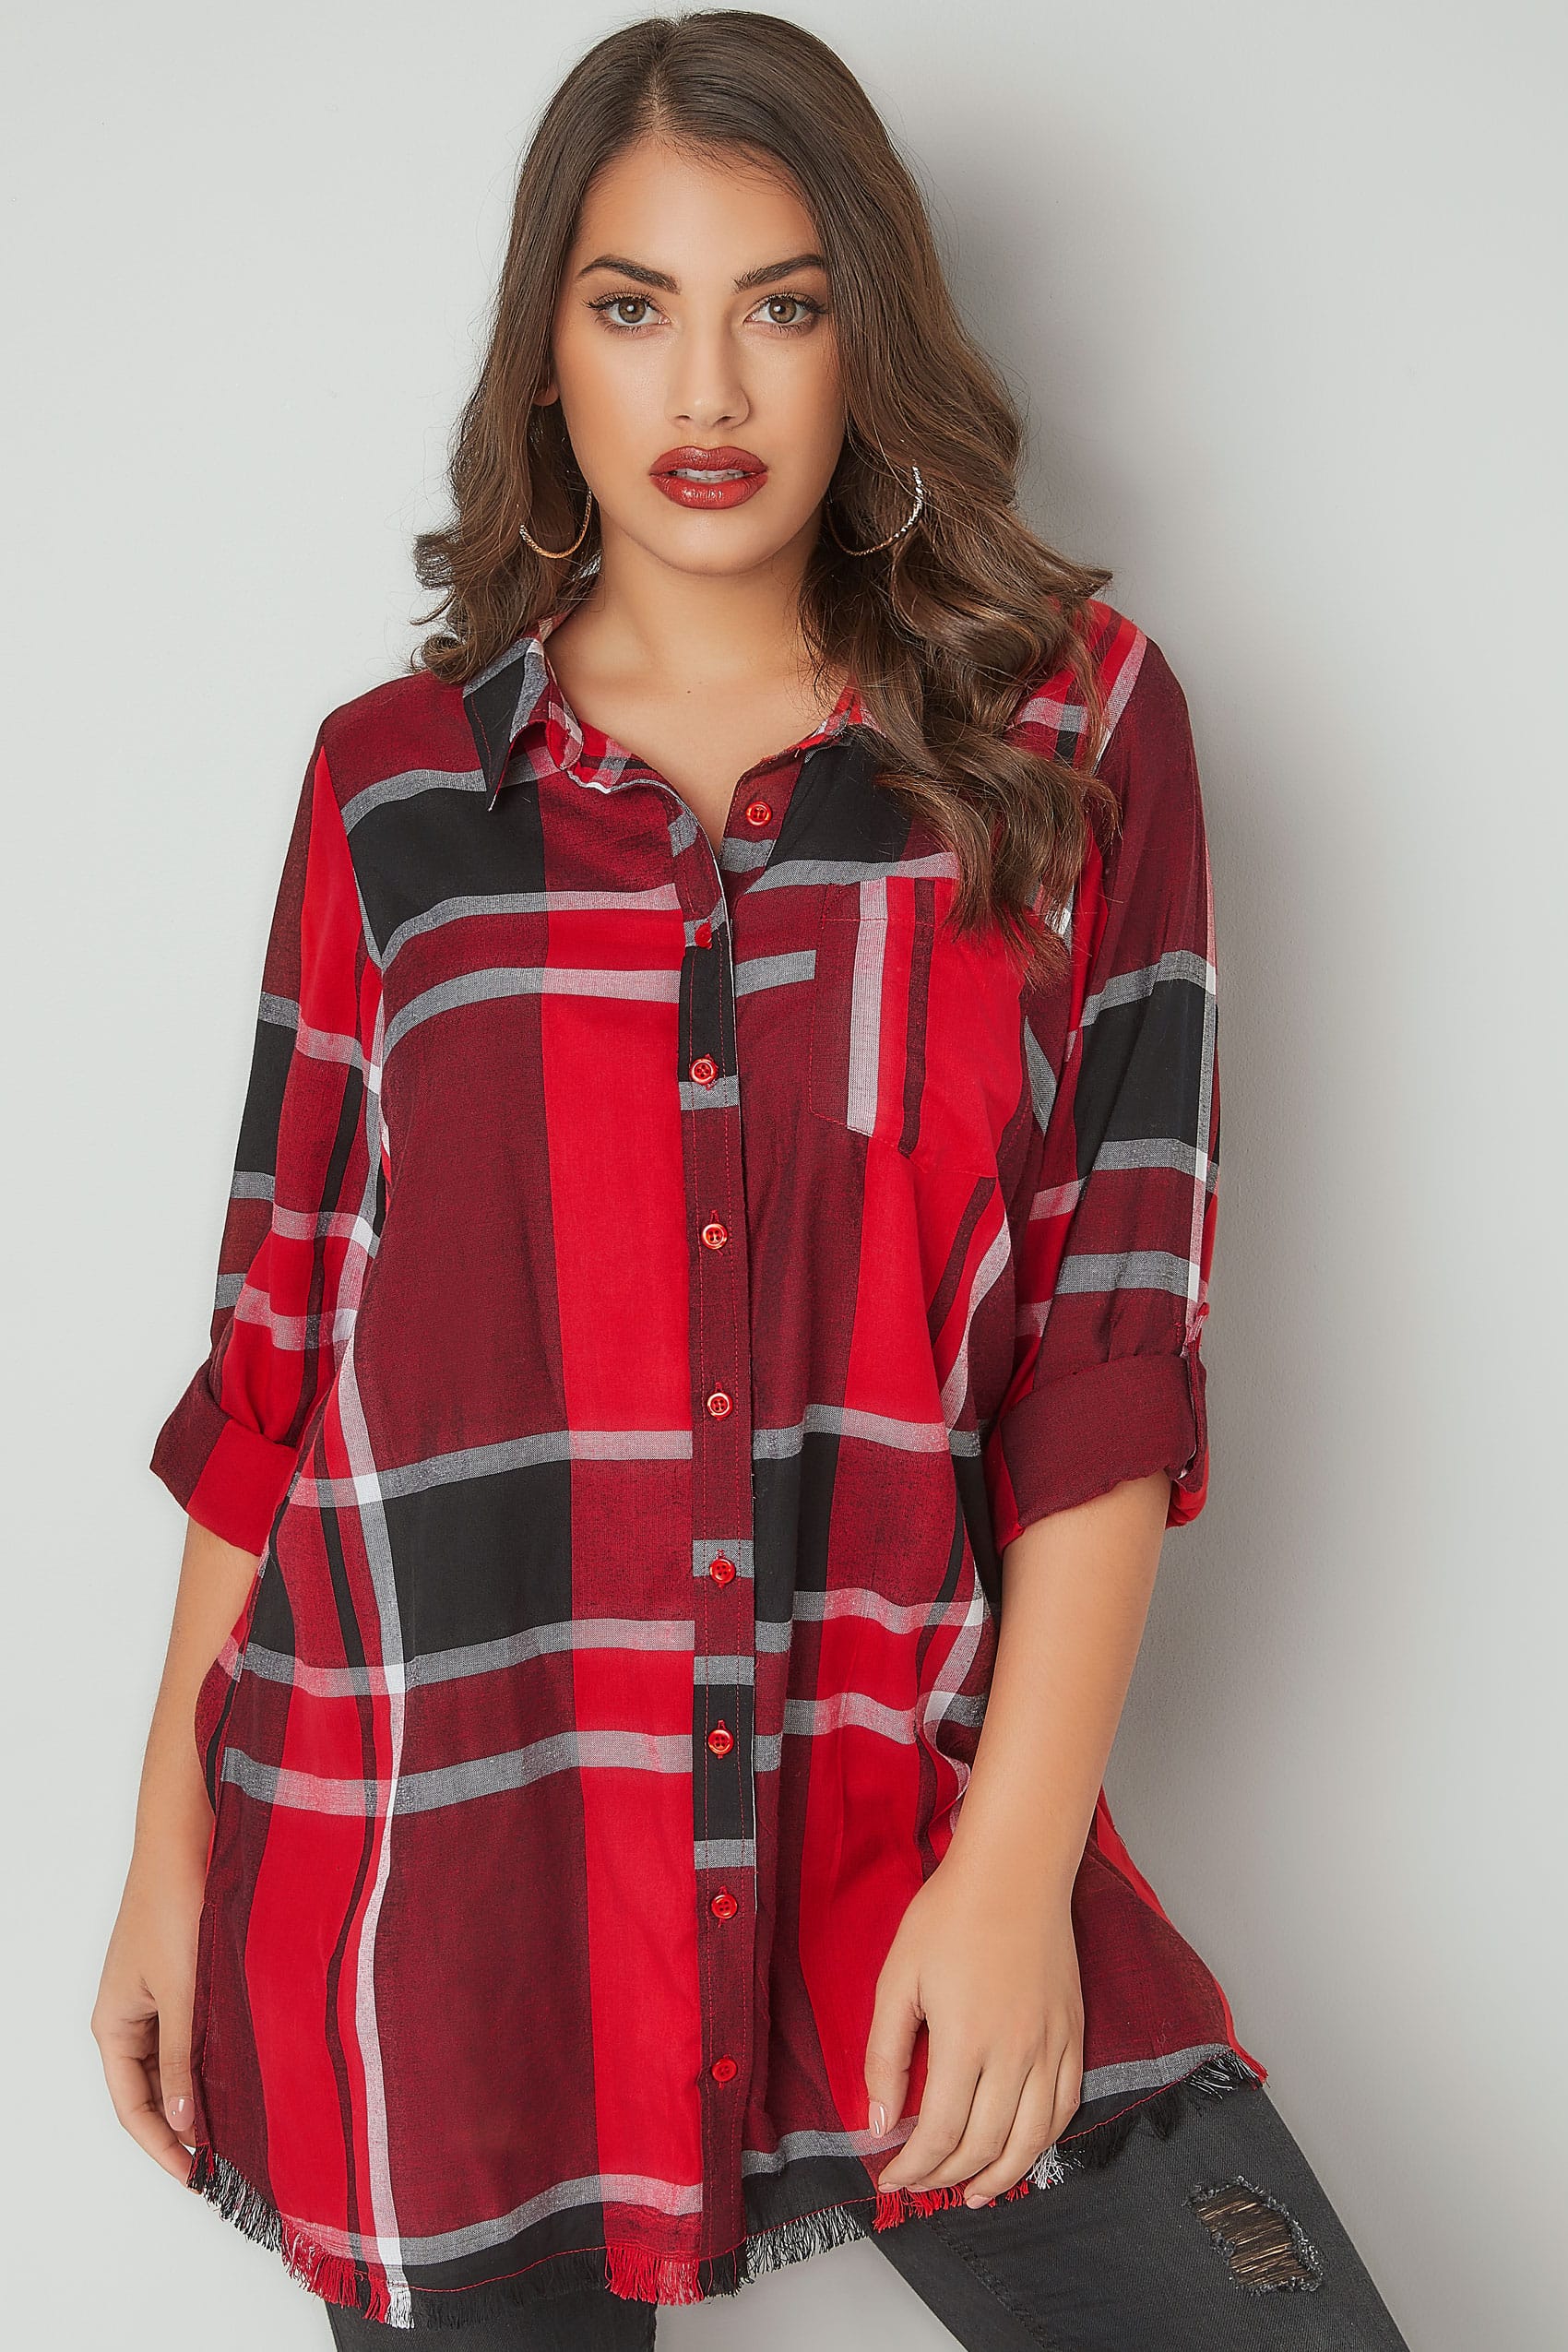 LIMITED COLLECTION Red & Multi Checked Shirt With Frayed Hem, Plus size ...